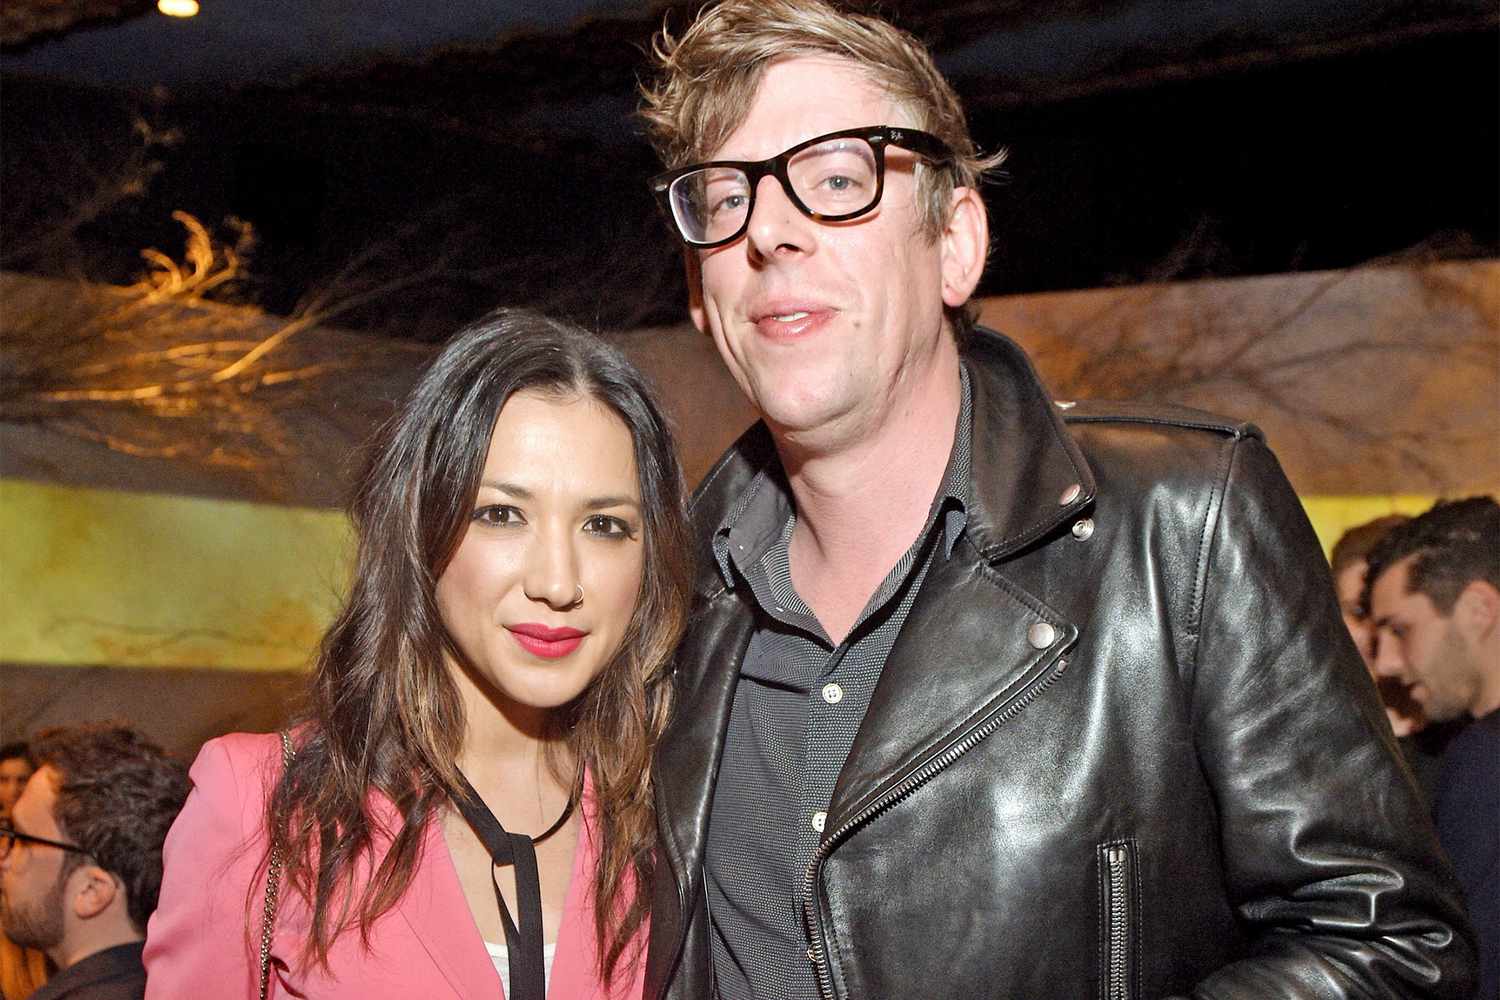 LOS ANGELES, CA - FEBRUARY 15: Singer-songwriter Michelle Branch and musician Patrick Carney of The Black Keys attend Universal Music Group 2016 Grammy After Party presented by American Airlines and Citi at The Theatre at Ace Hotel Downtown LA on February 15, 2016 in Los Angeles, California. (Photo by Jason Kempin/Getty Images for Universal Music Group)